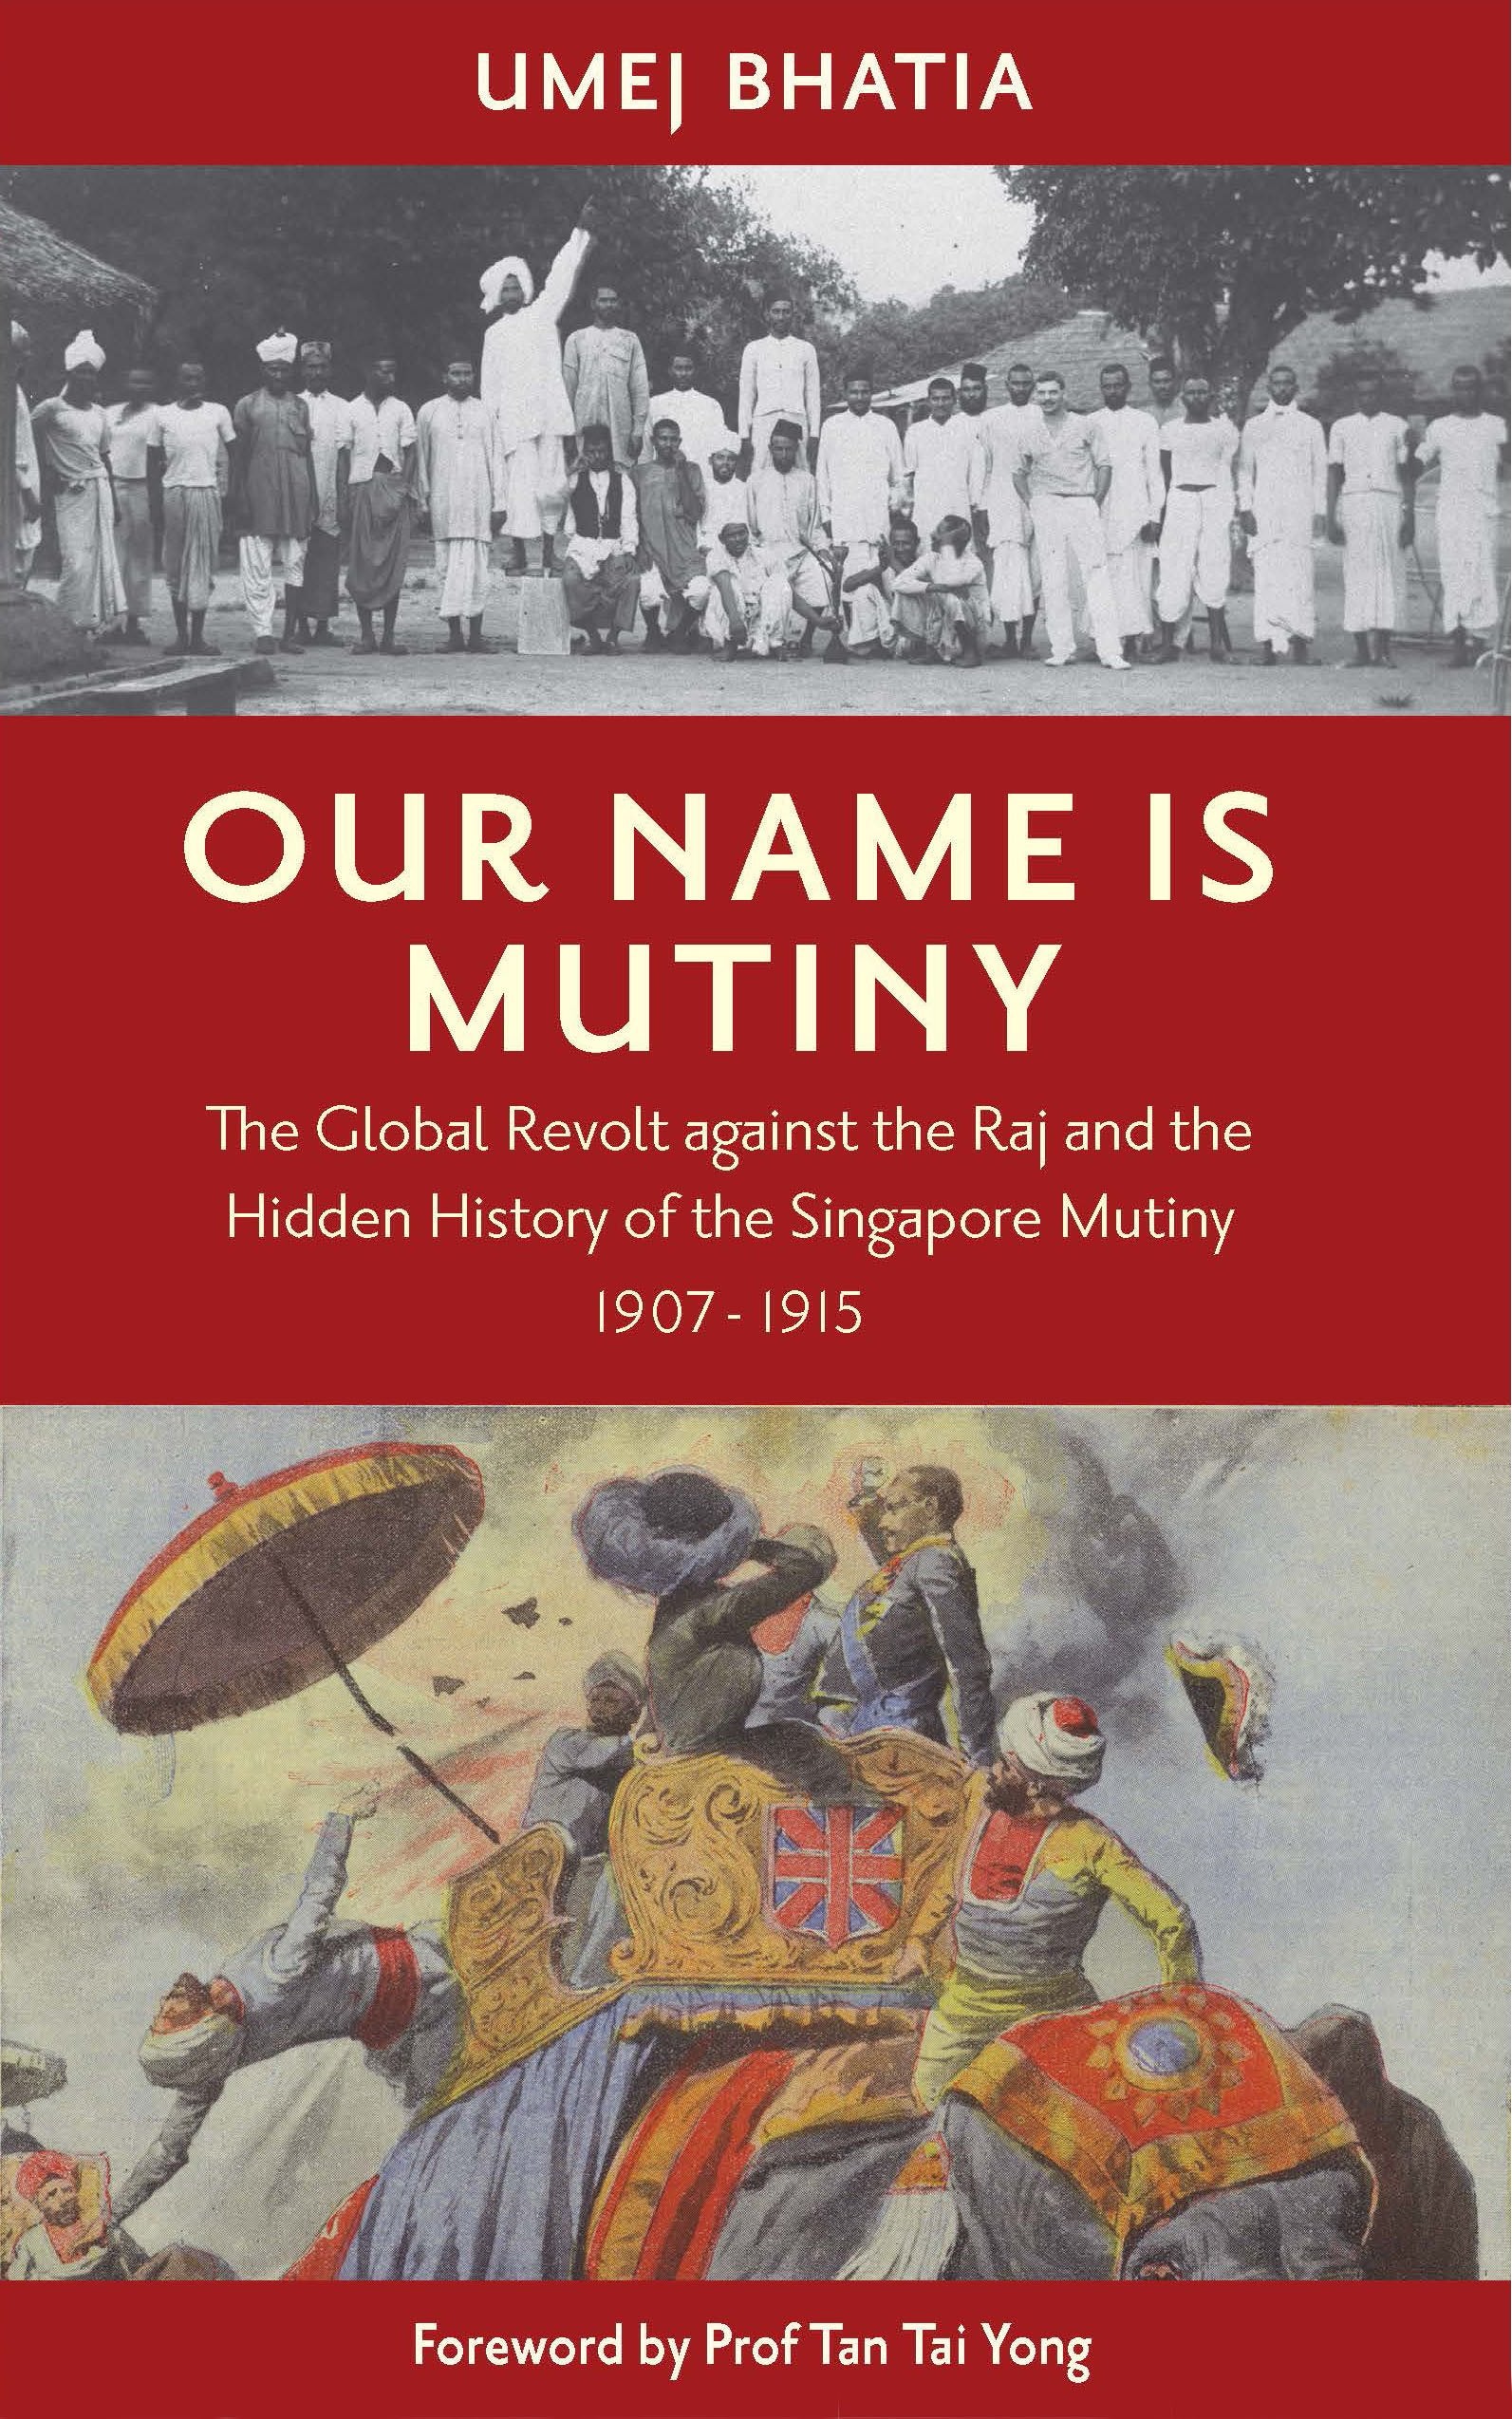 Our Name is Mutiny: The Global Revolt Against the Raj and the Hidden History of the Singapore Mutiny, 1907-1915